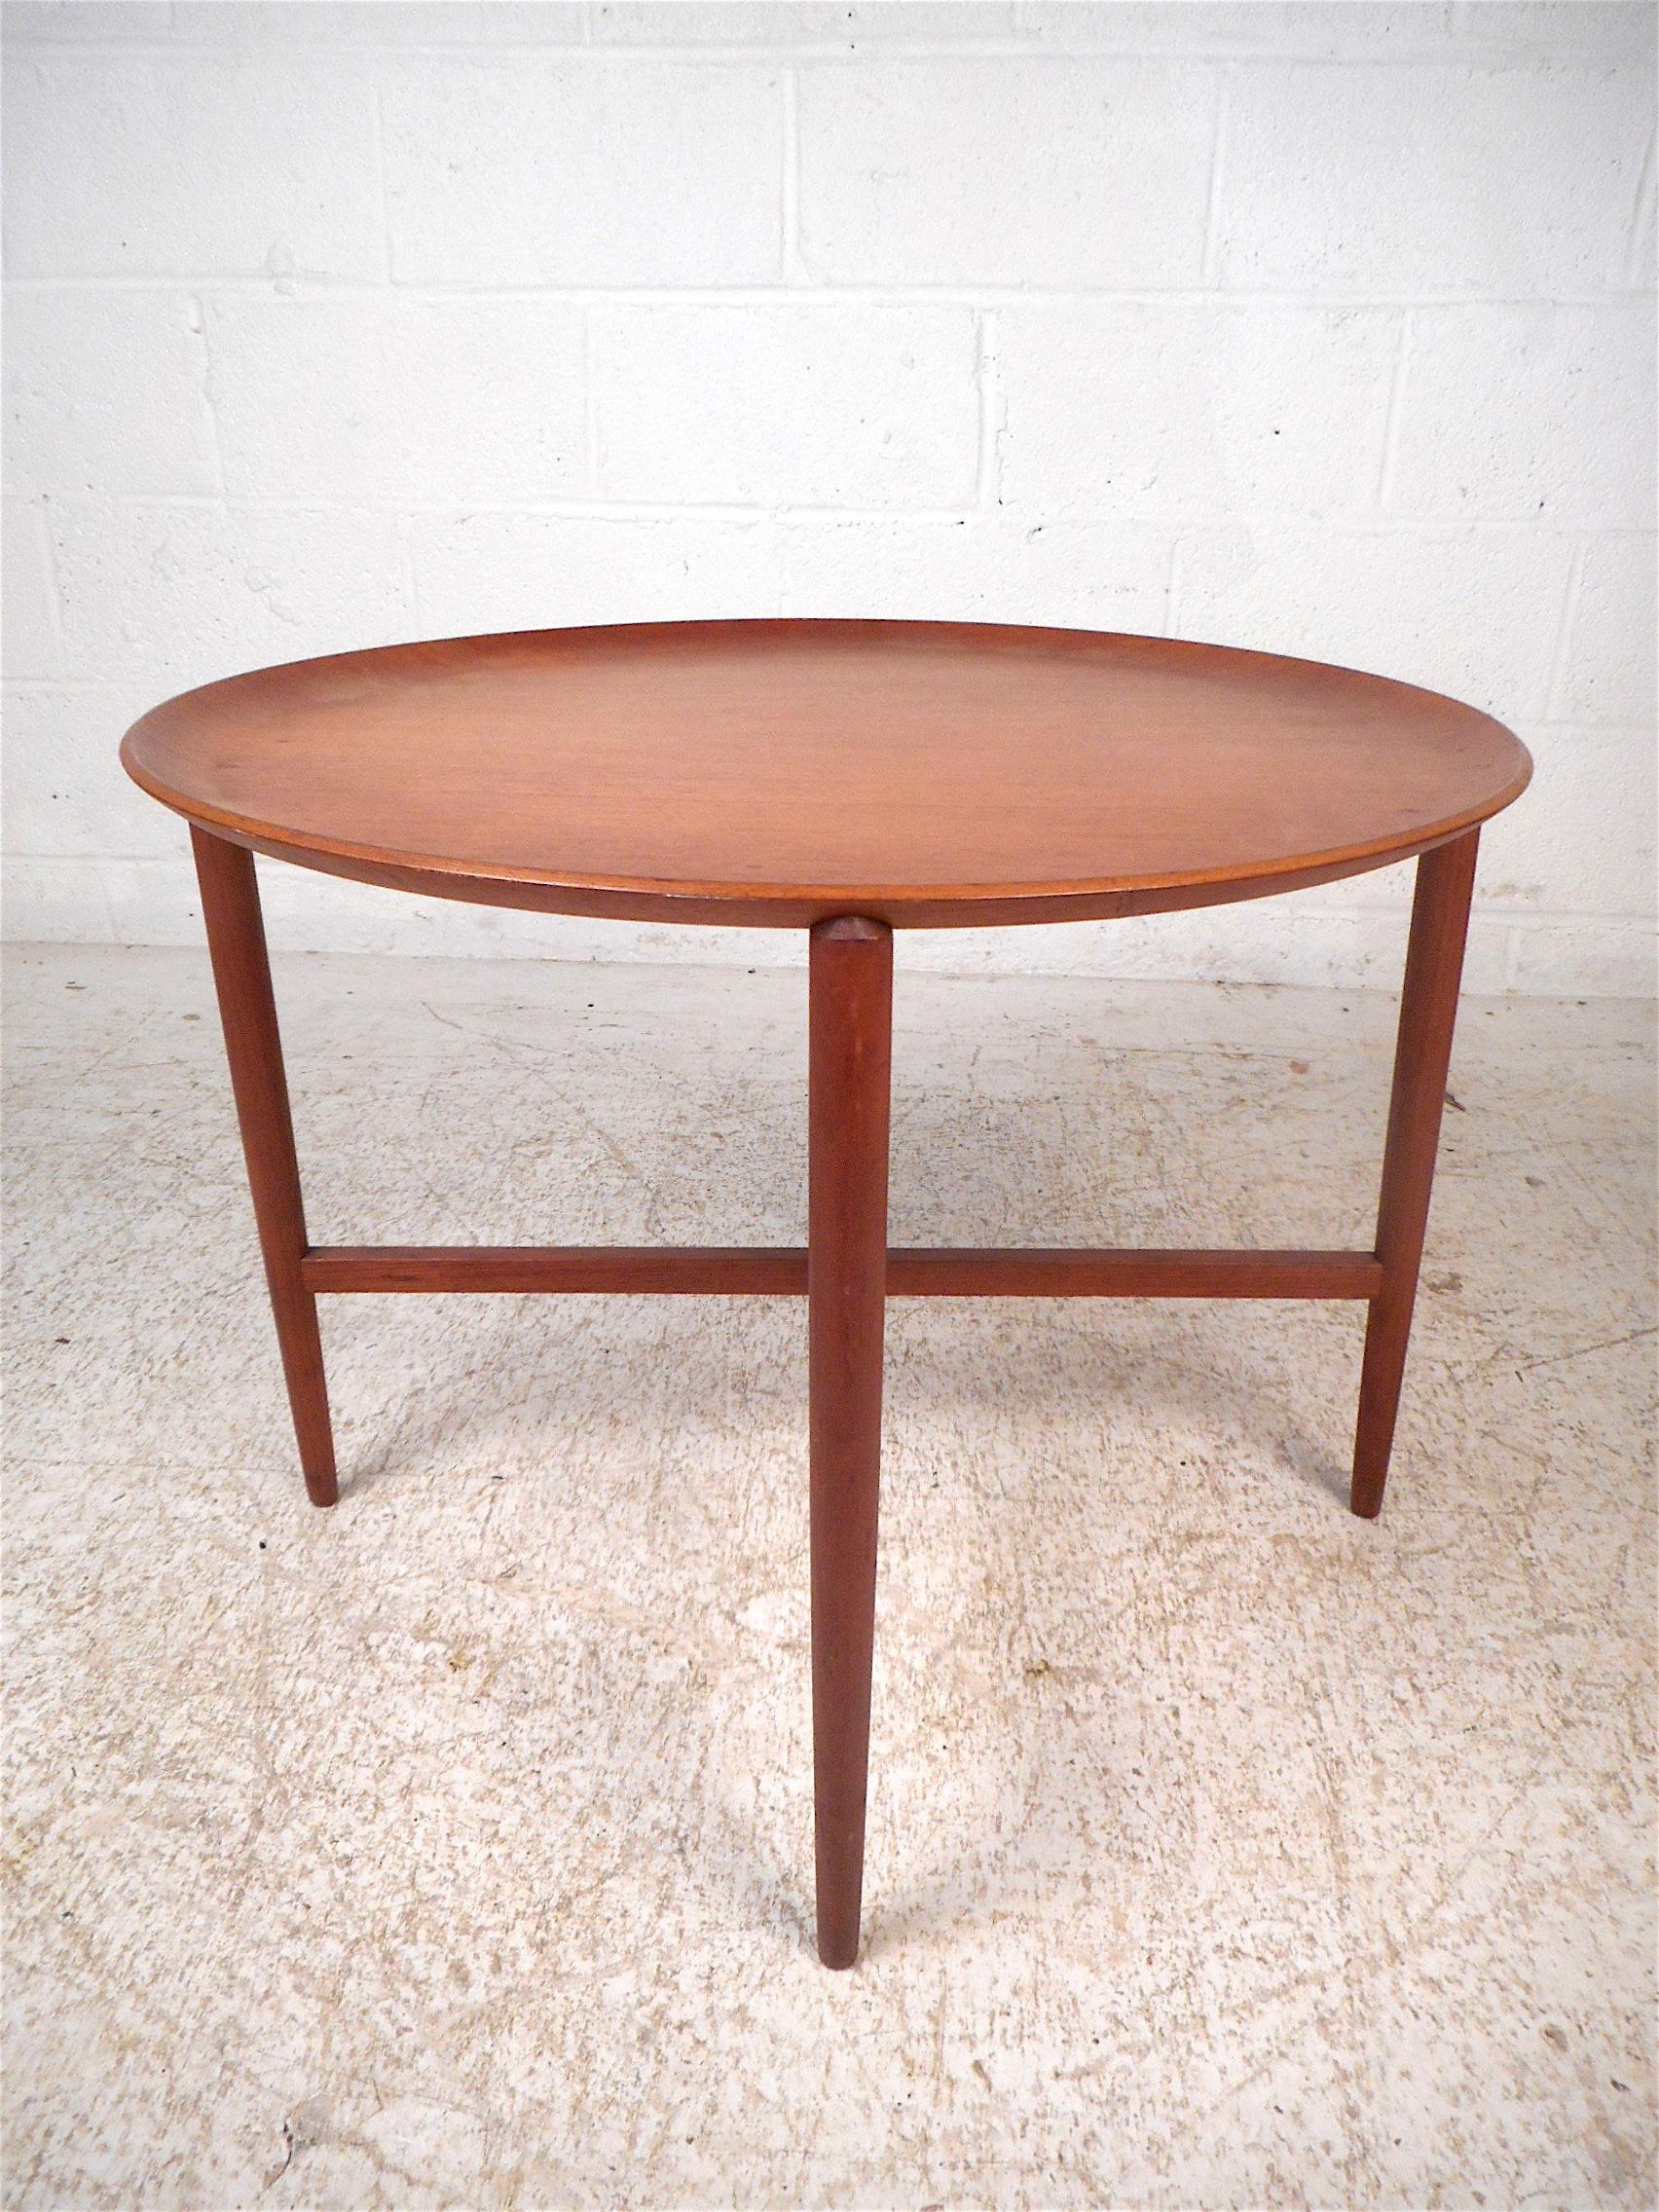 Stylish Danish modern tray table. Teak wood construction. The base's slim and sleek angular profile is complimented by the circular tabletop with raised edges. A nice piece sure to impress in any modern interior. Please confirm item location with